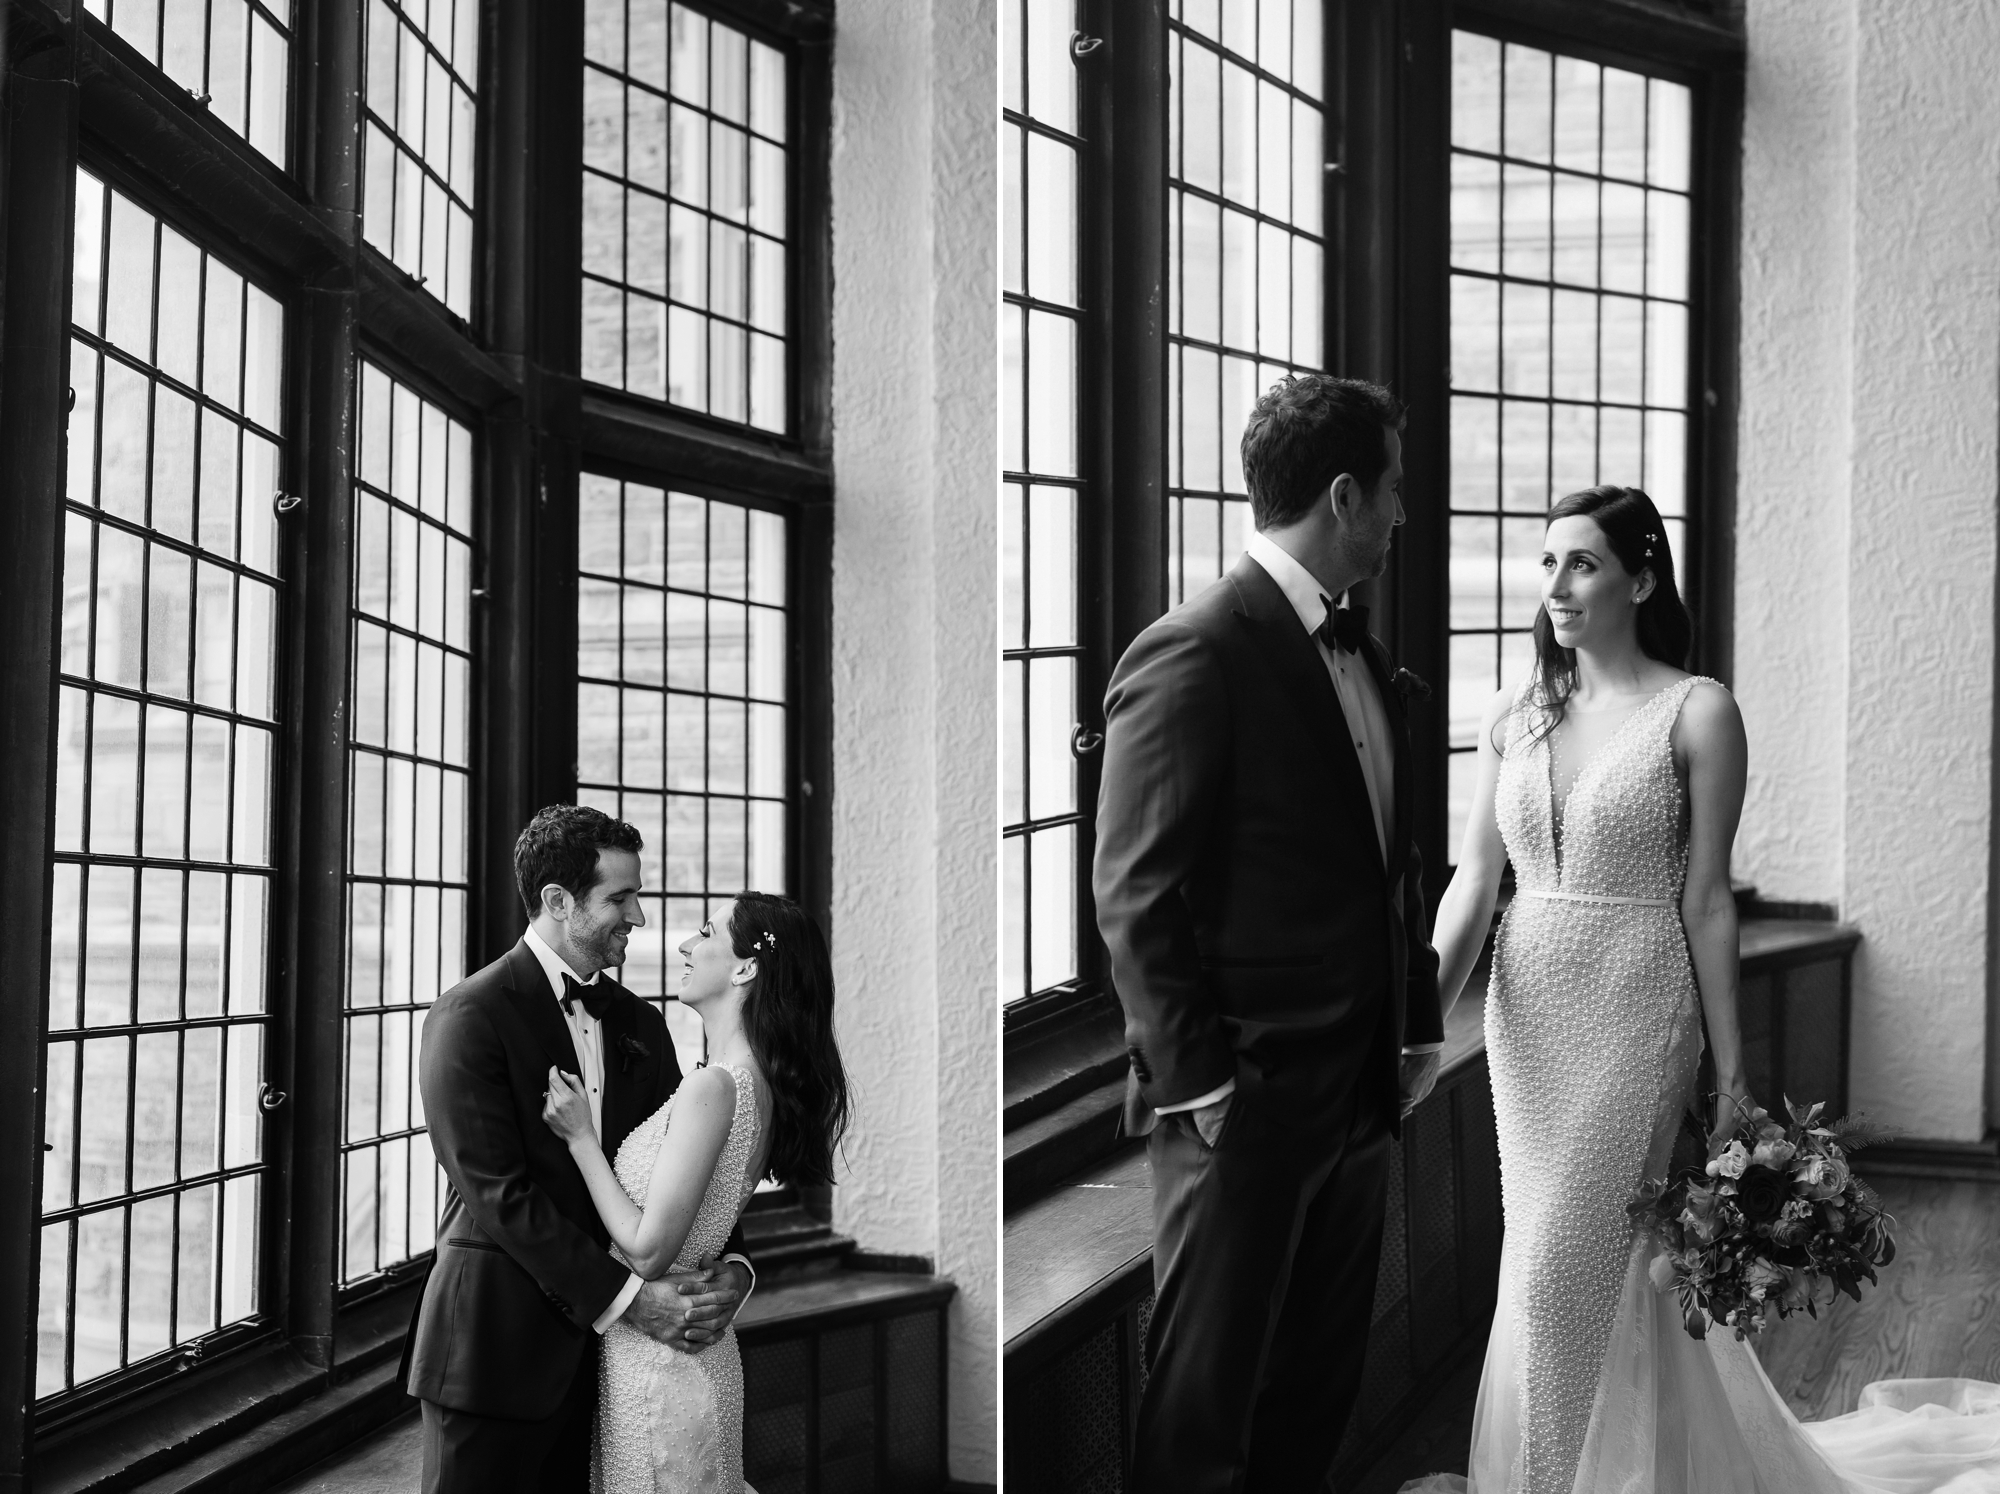 Black and White portraits of the bride and groom in front of a large window together at Casa Loma in Toronto